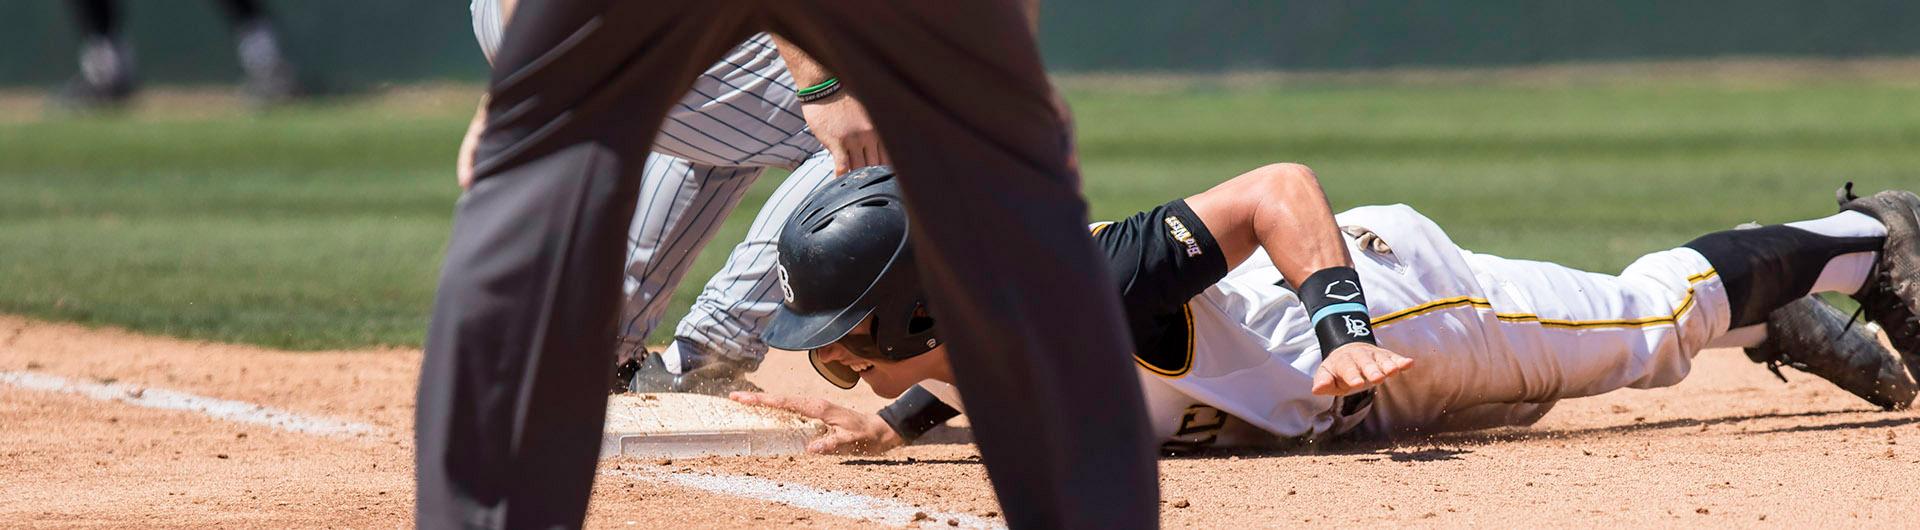 Dirtbags player slides into home